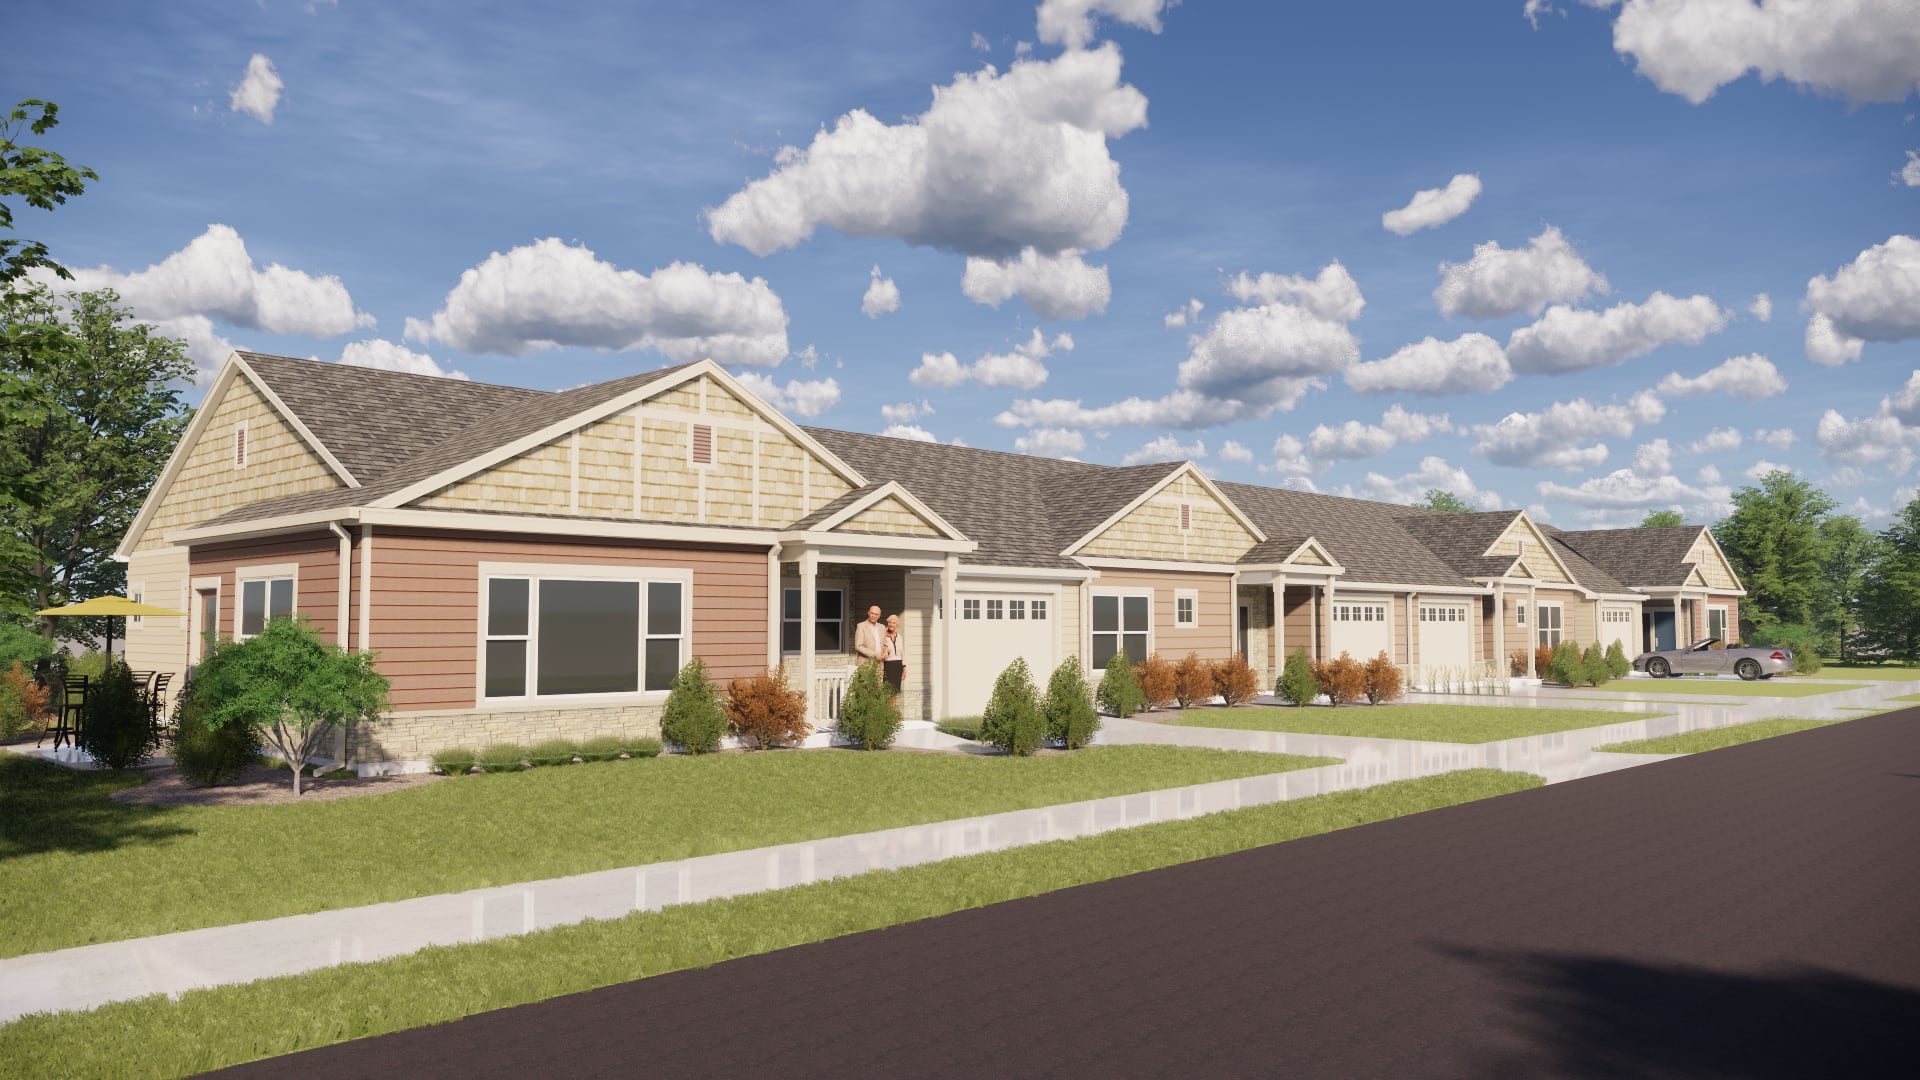 Architect's rendering of the independent living townhomes to be built on an 11 acre parcel at the northwest corner of Route 31 and West Washington Street adjoining Village Hall in Oswego.